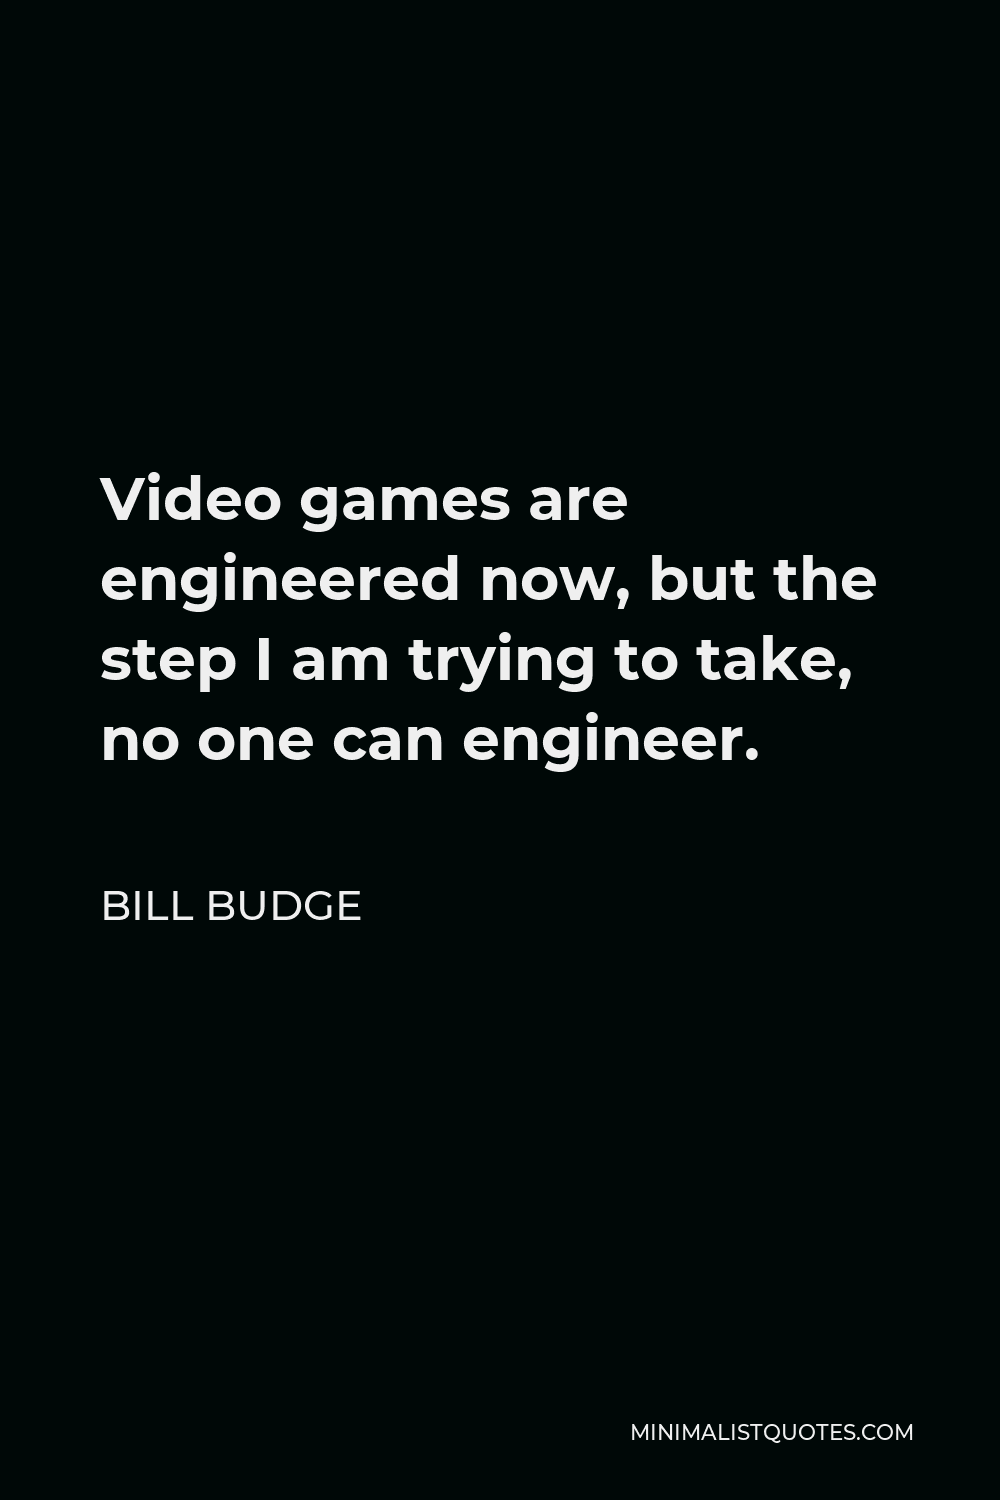 Bill Budge Quote - Video games are engineered now, but the step I am trying to take, no one can engineer.